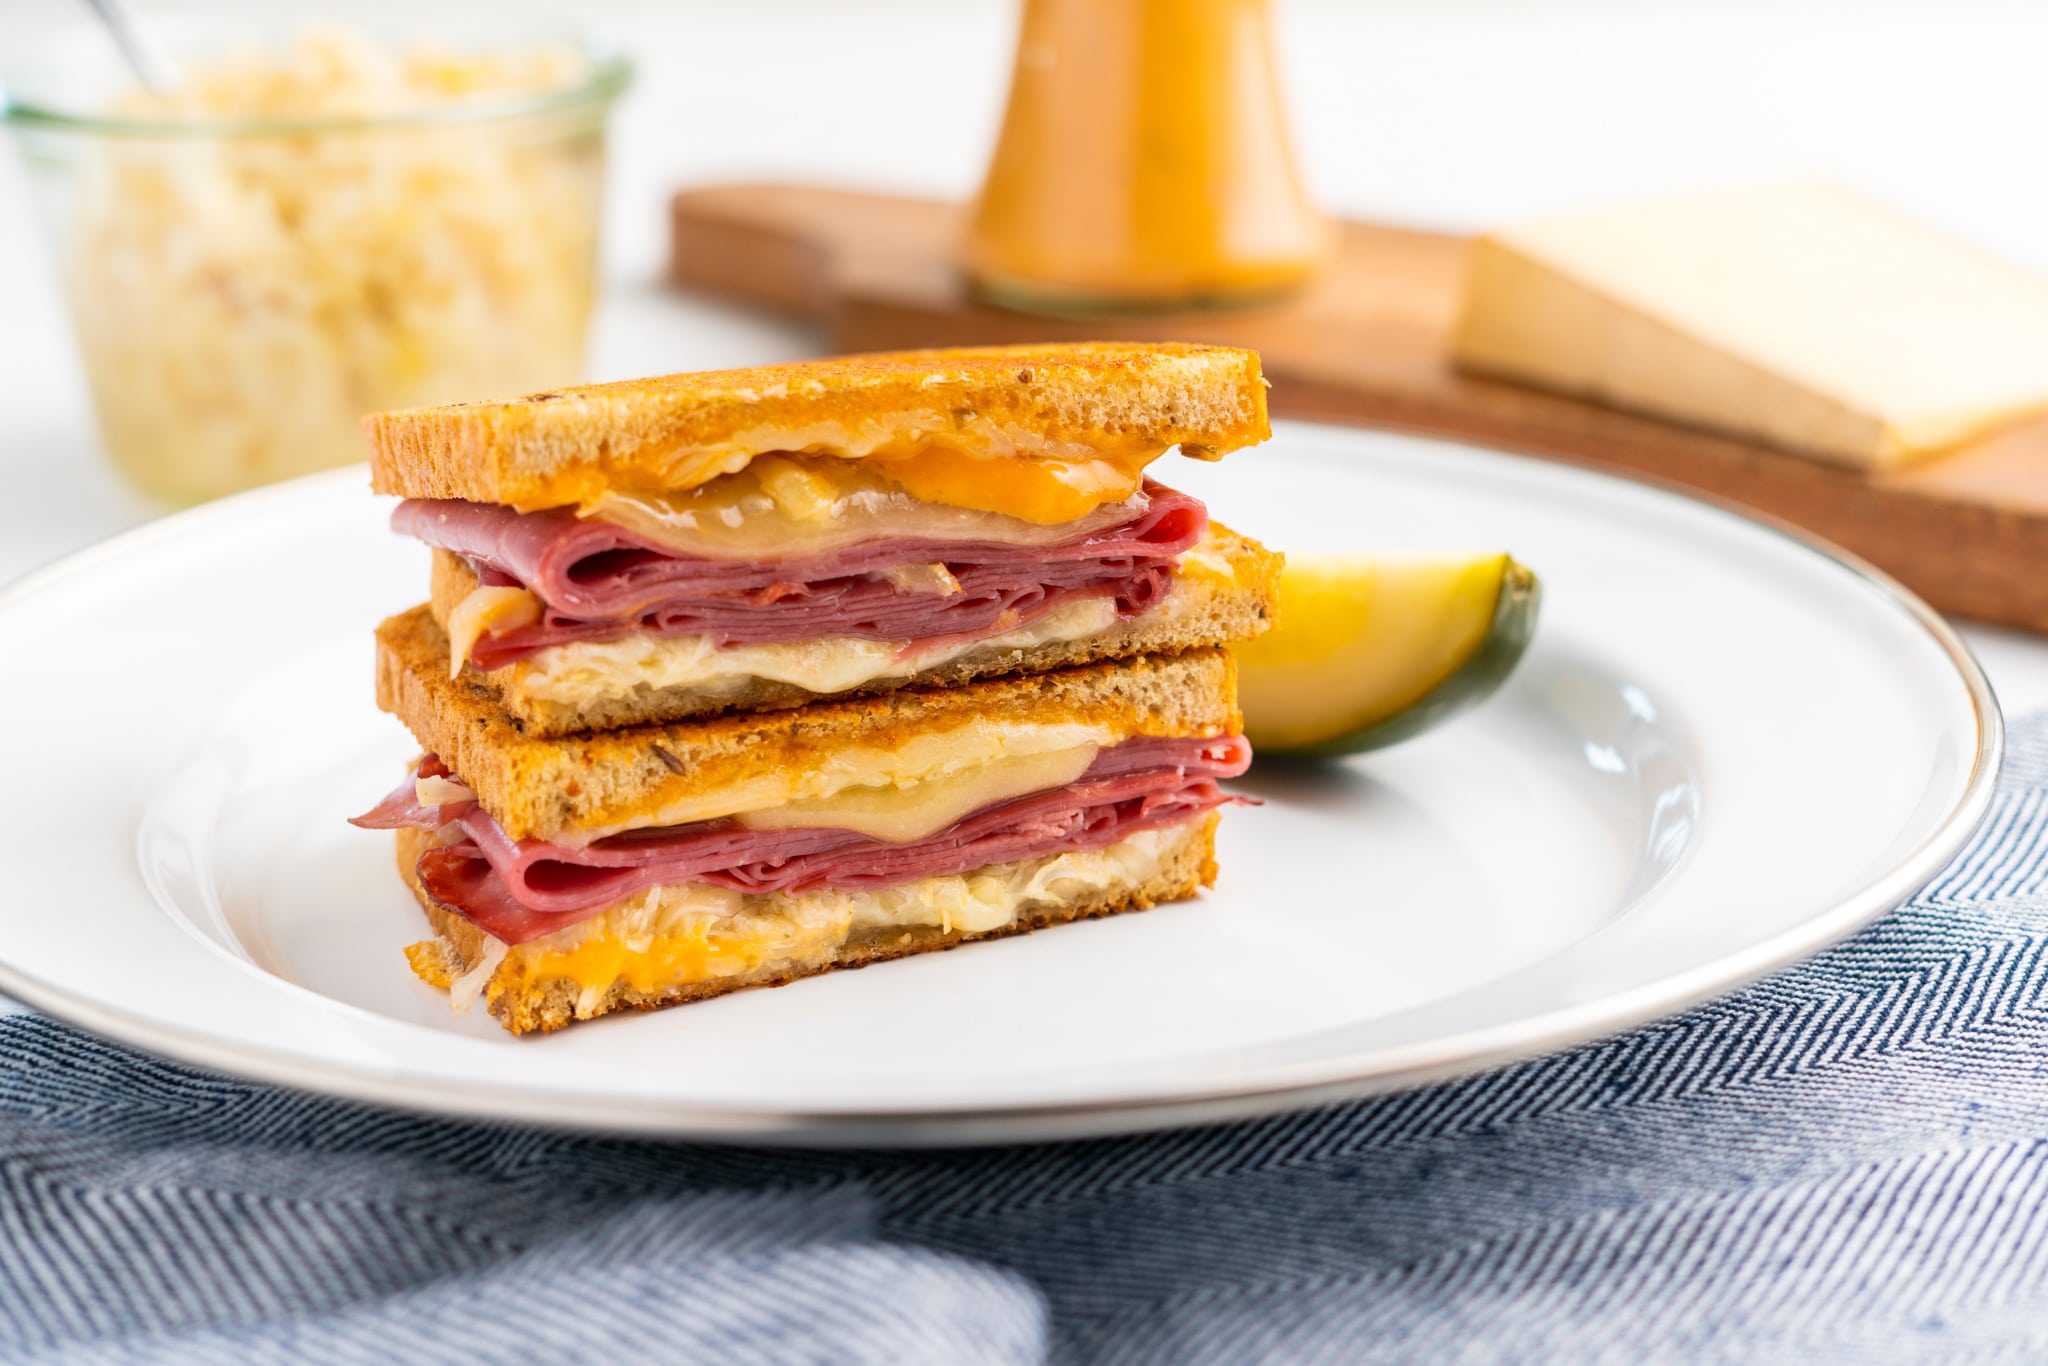 reuben grilled cheese on a plate with a pickle